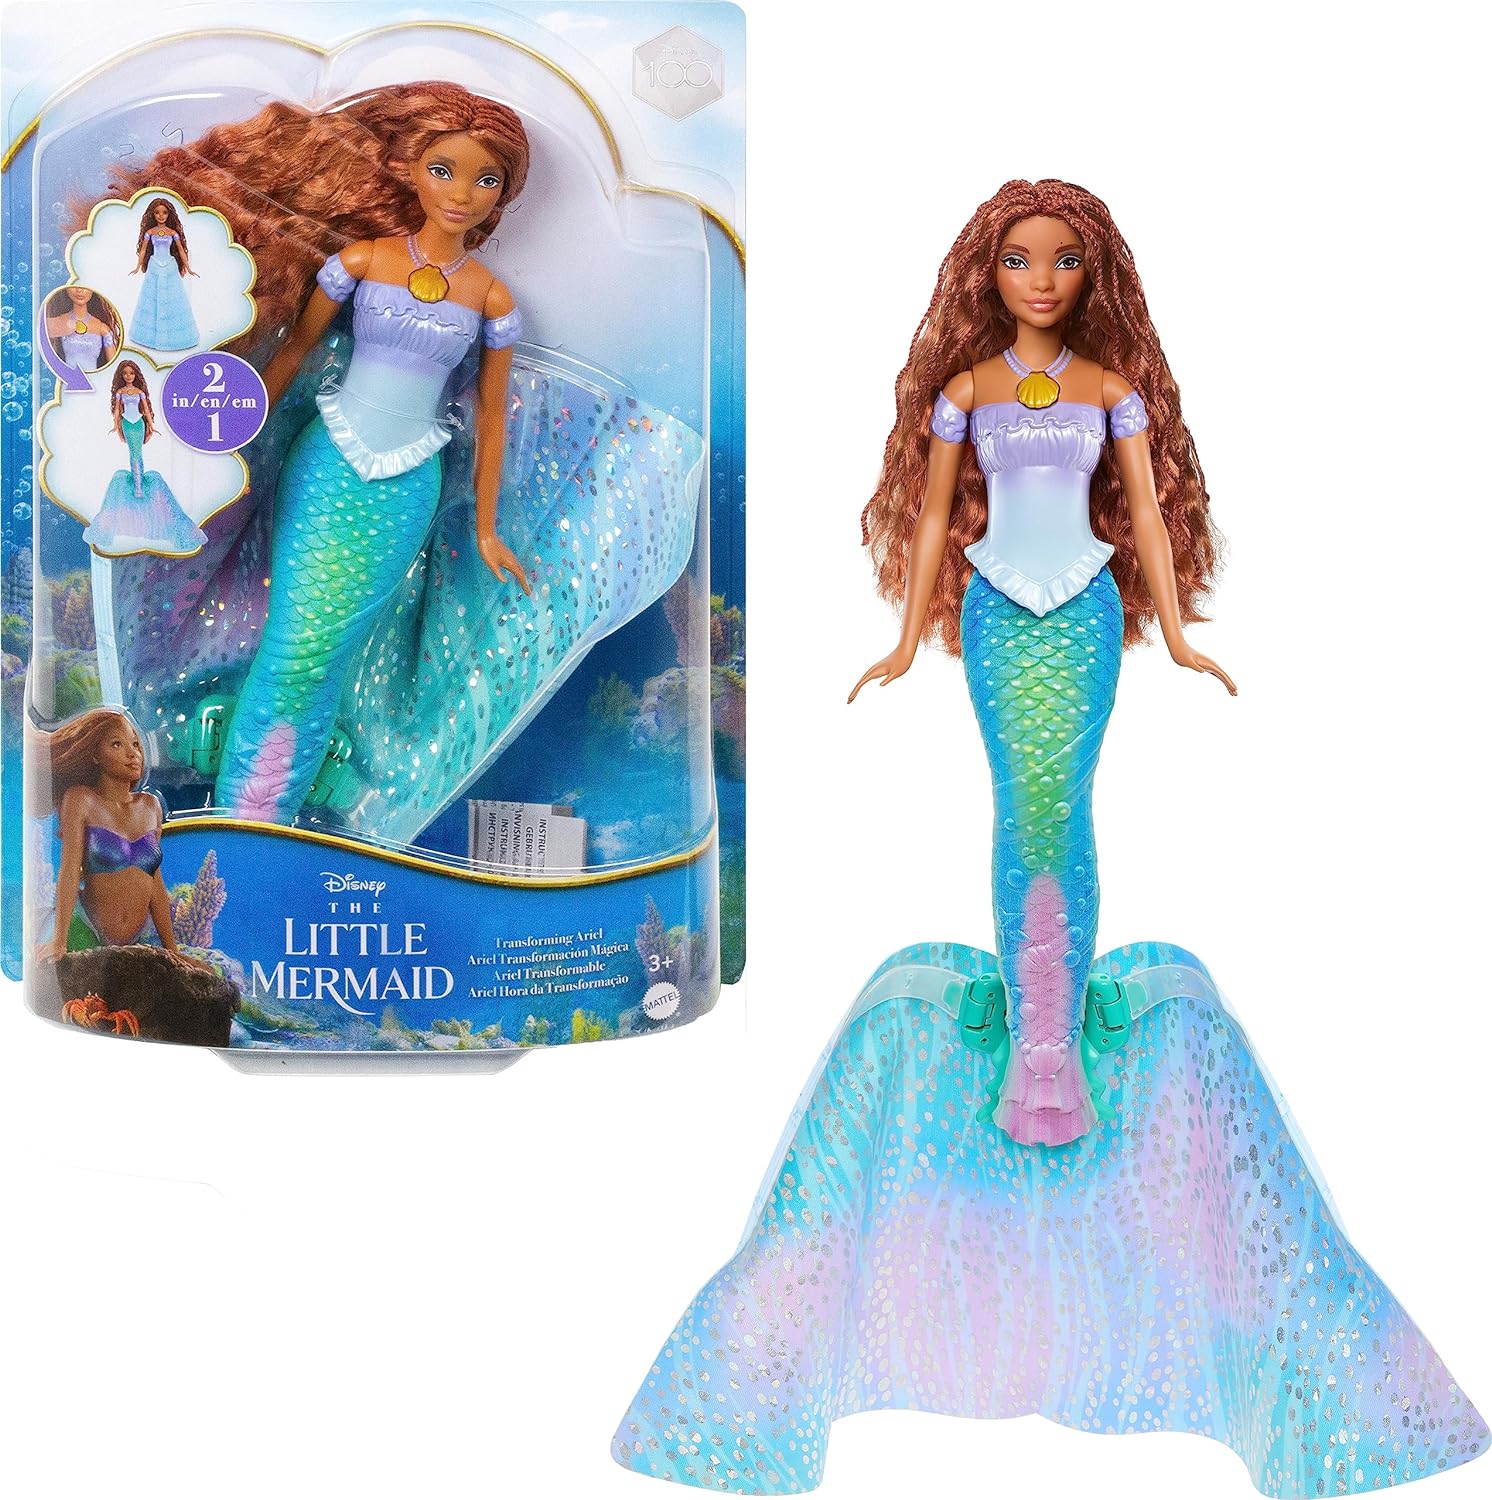 Yellow River Mermaid Doll Princess Doll Playset, Color Changing Mermaid  Tail by Reversing Squins, 12 Fashion Dress Doll with 3 Little Mermaid  Dolphin and Accessories, Mermaid Gift for Girls : : Toys